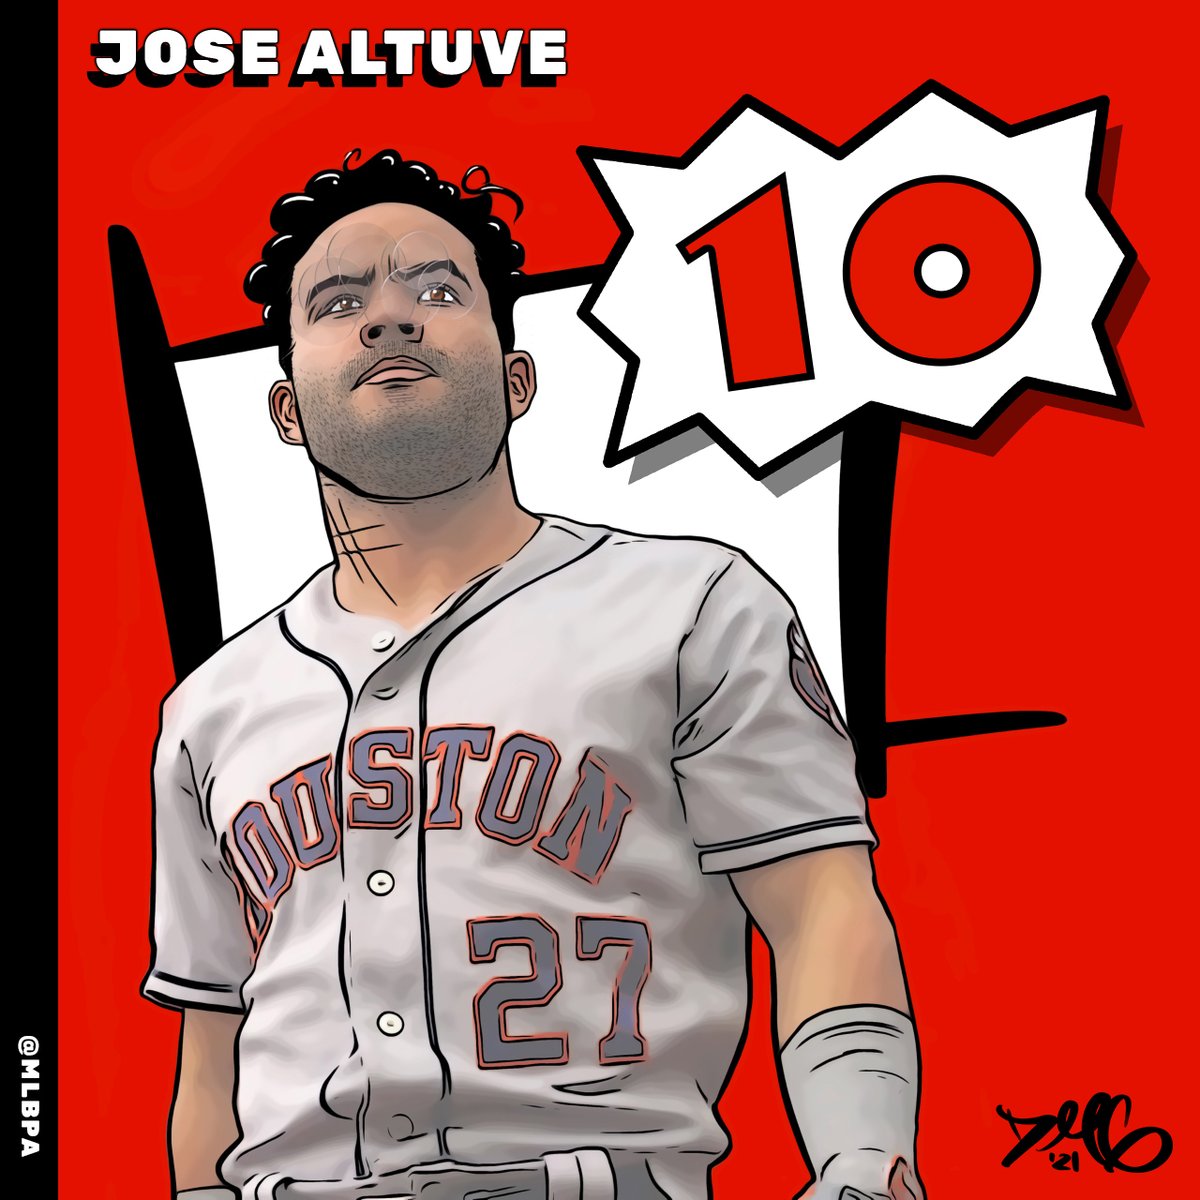 Since his debut in 2011 with the @astros, Jose Altuve has made seven All-Star teams. The Venezuelan second baseman was part of the World Champion Houston Astros in 2017 – the same year he won the AL MVP. Congrats on 10 years of service time, Tuve!